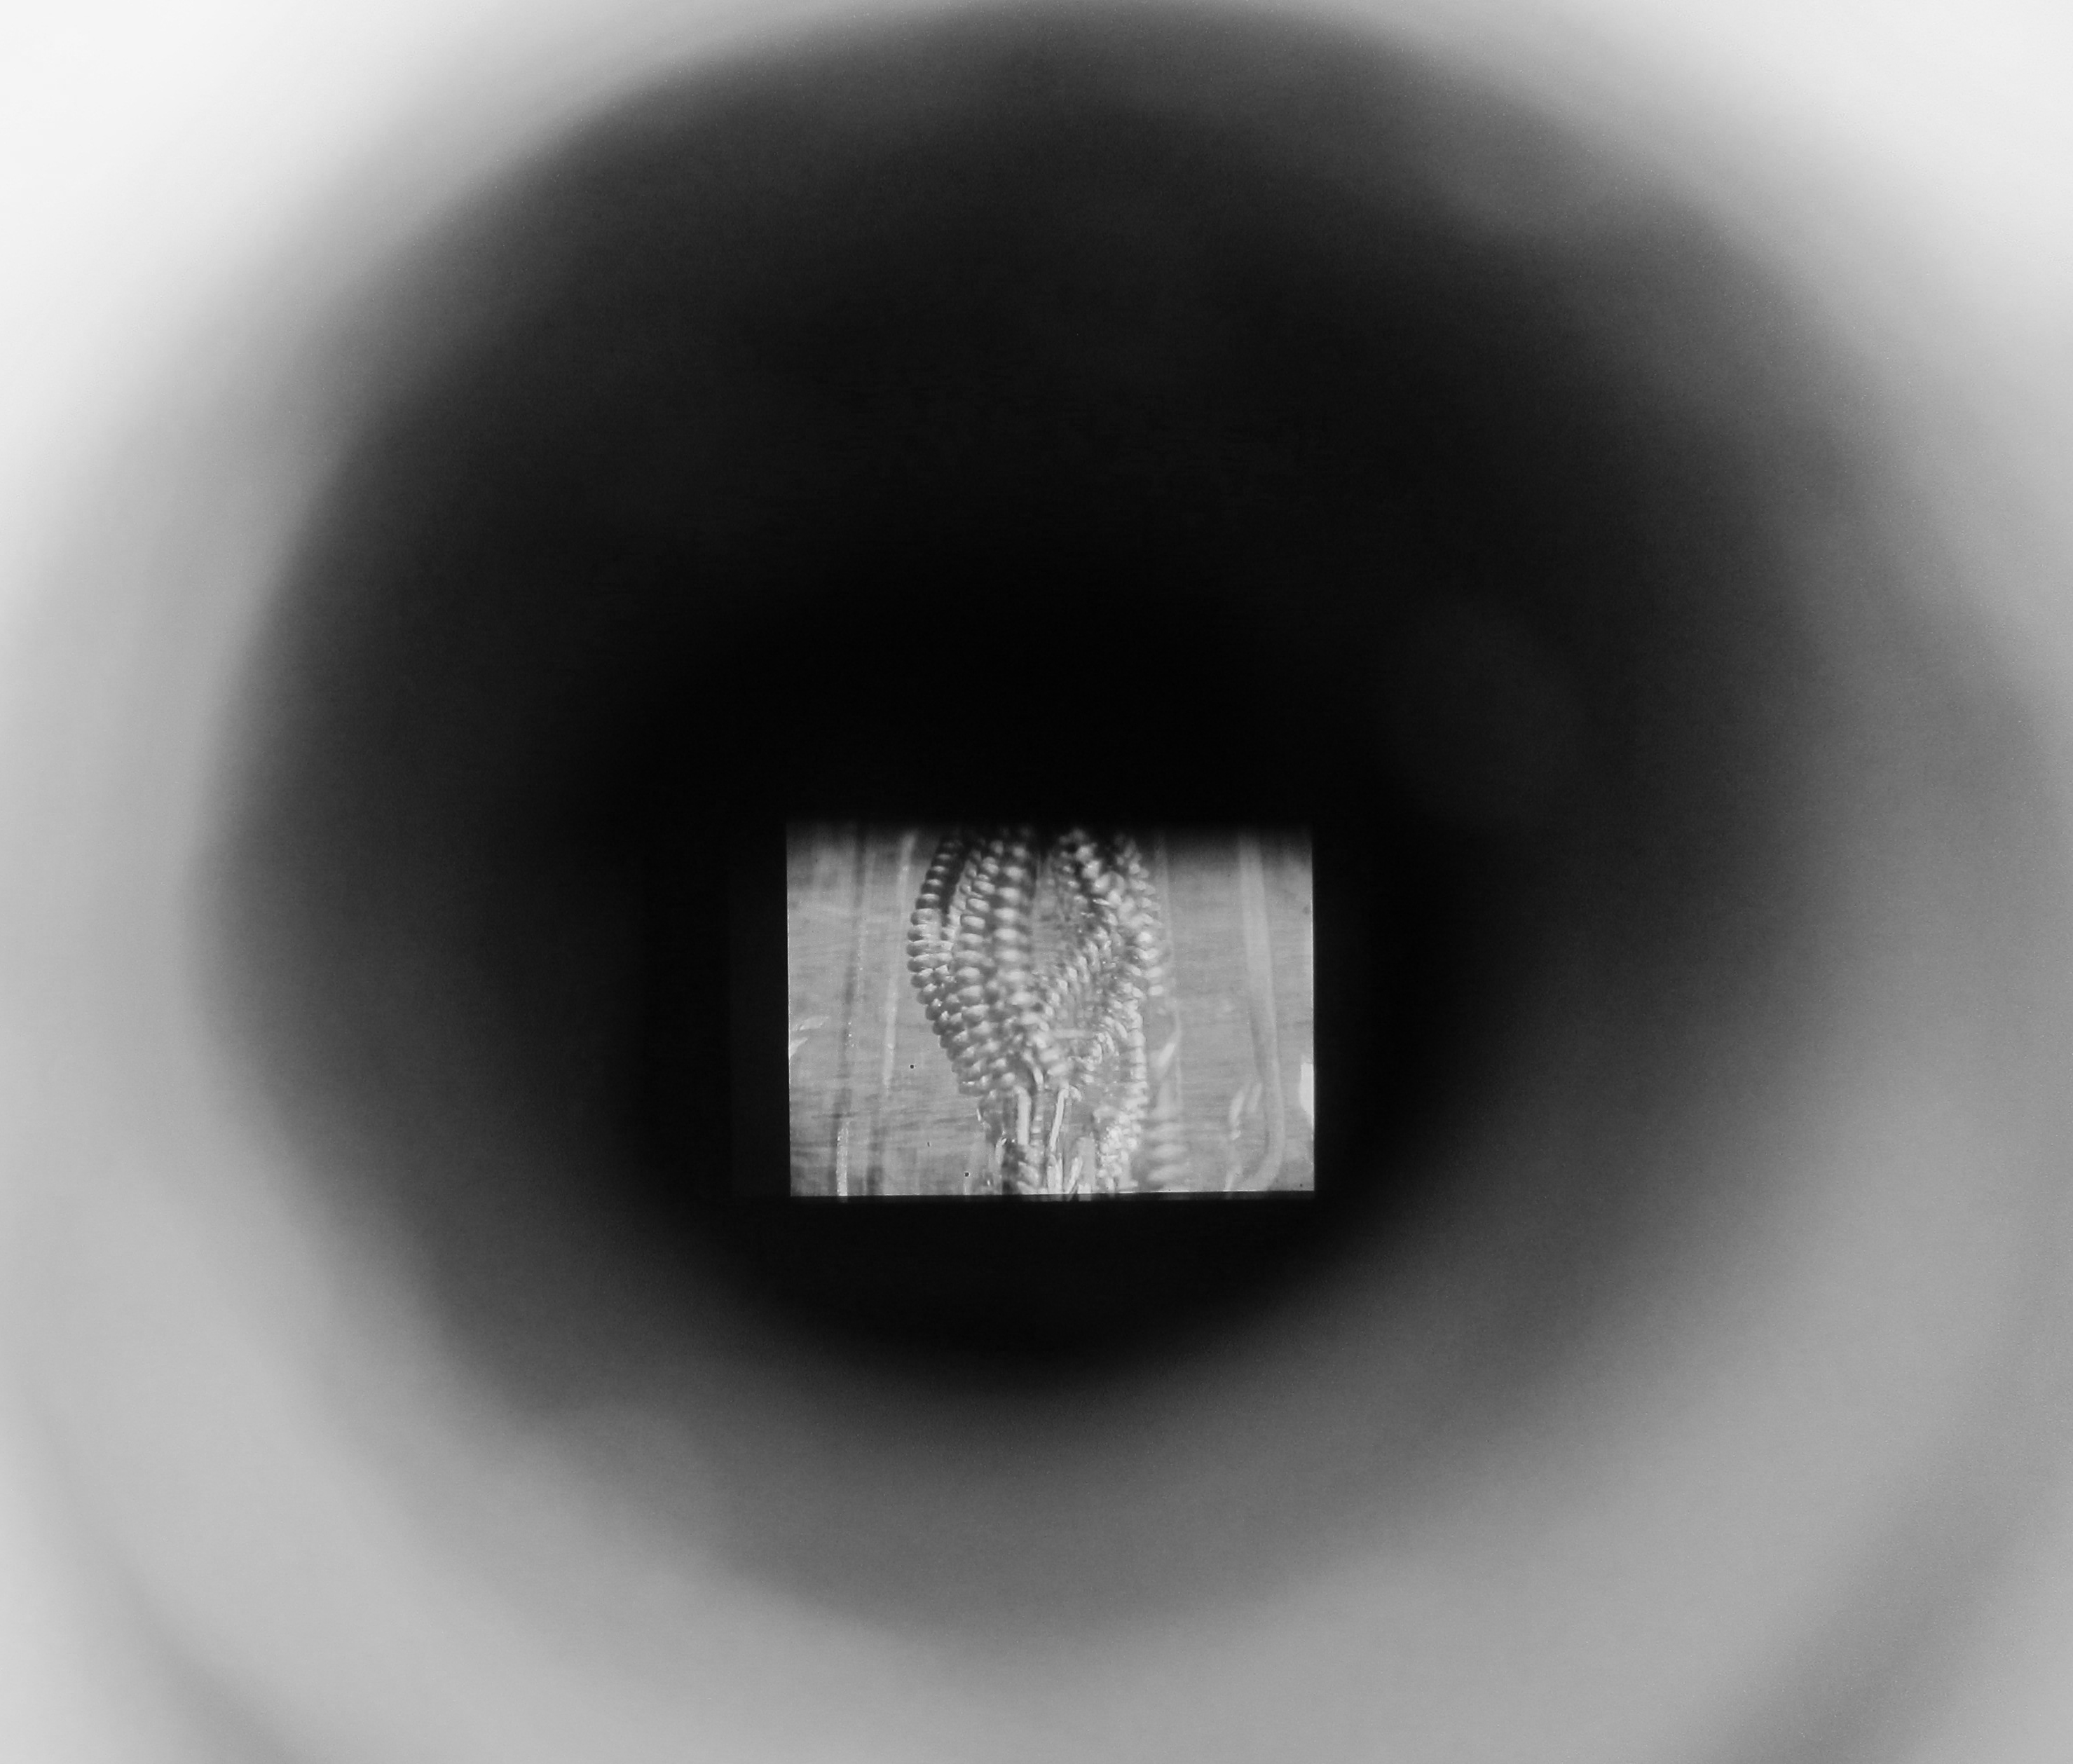 VINTAGE FIND...a film as viewed through the peephole. Pic: Francis Kohler